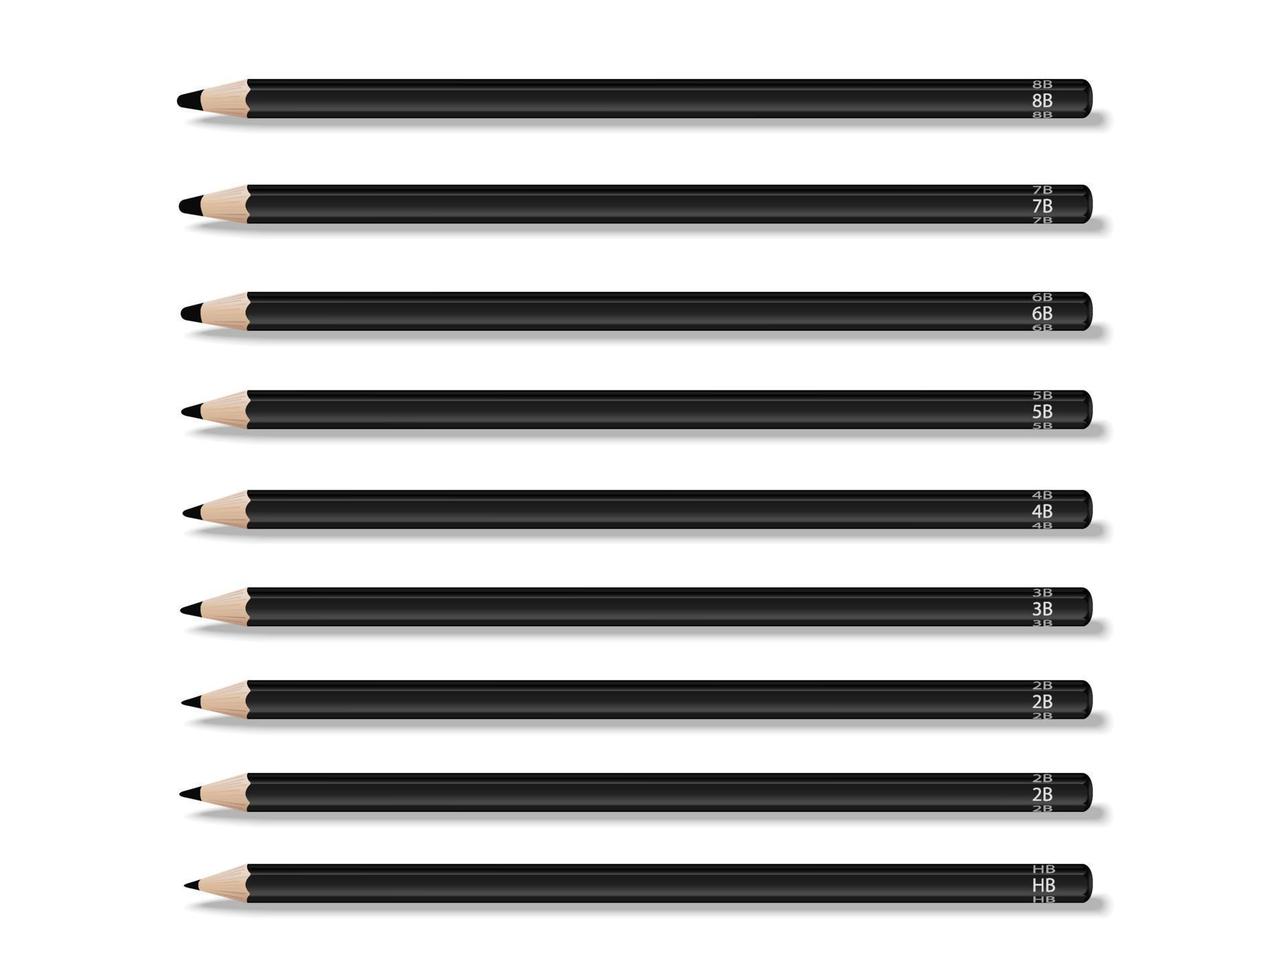 pencils in various sizes lined up vector